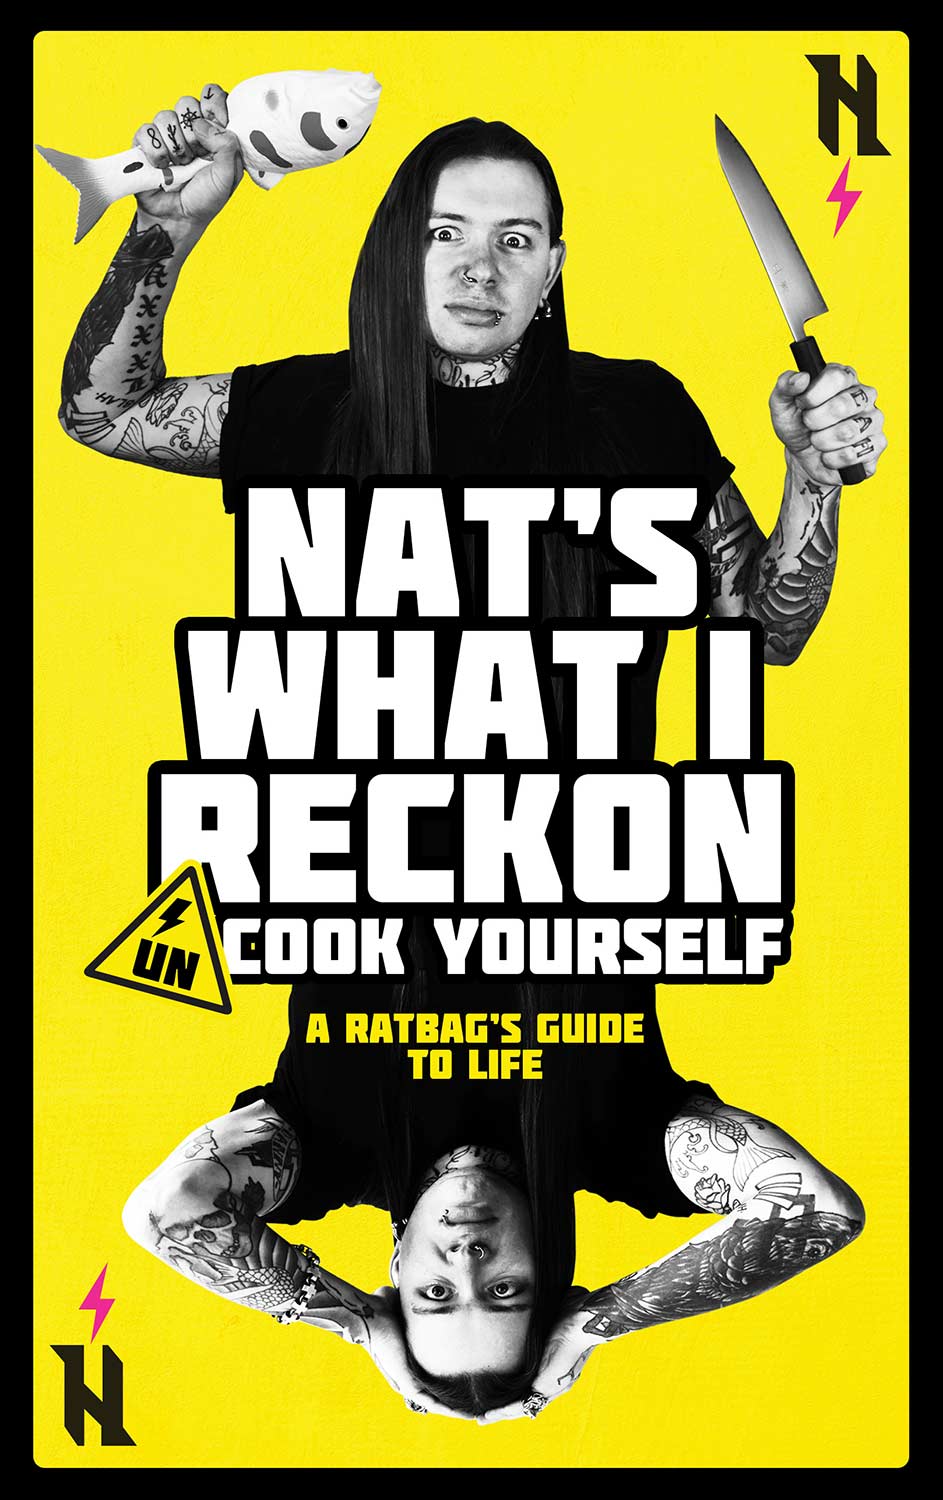 Un-Cook Yourself: A Ratbag's Guide to Life by Nat's What I Reckon